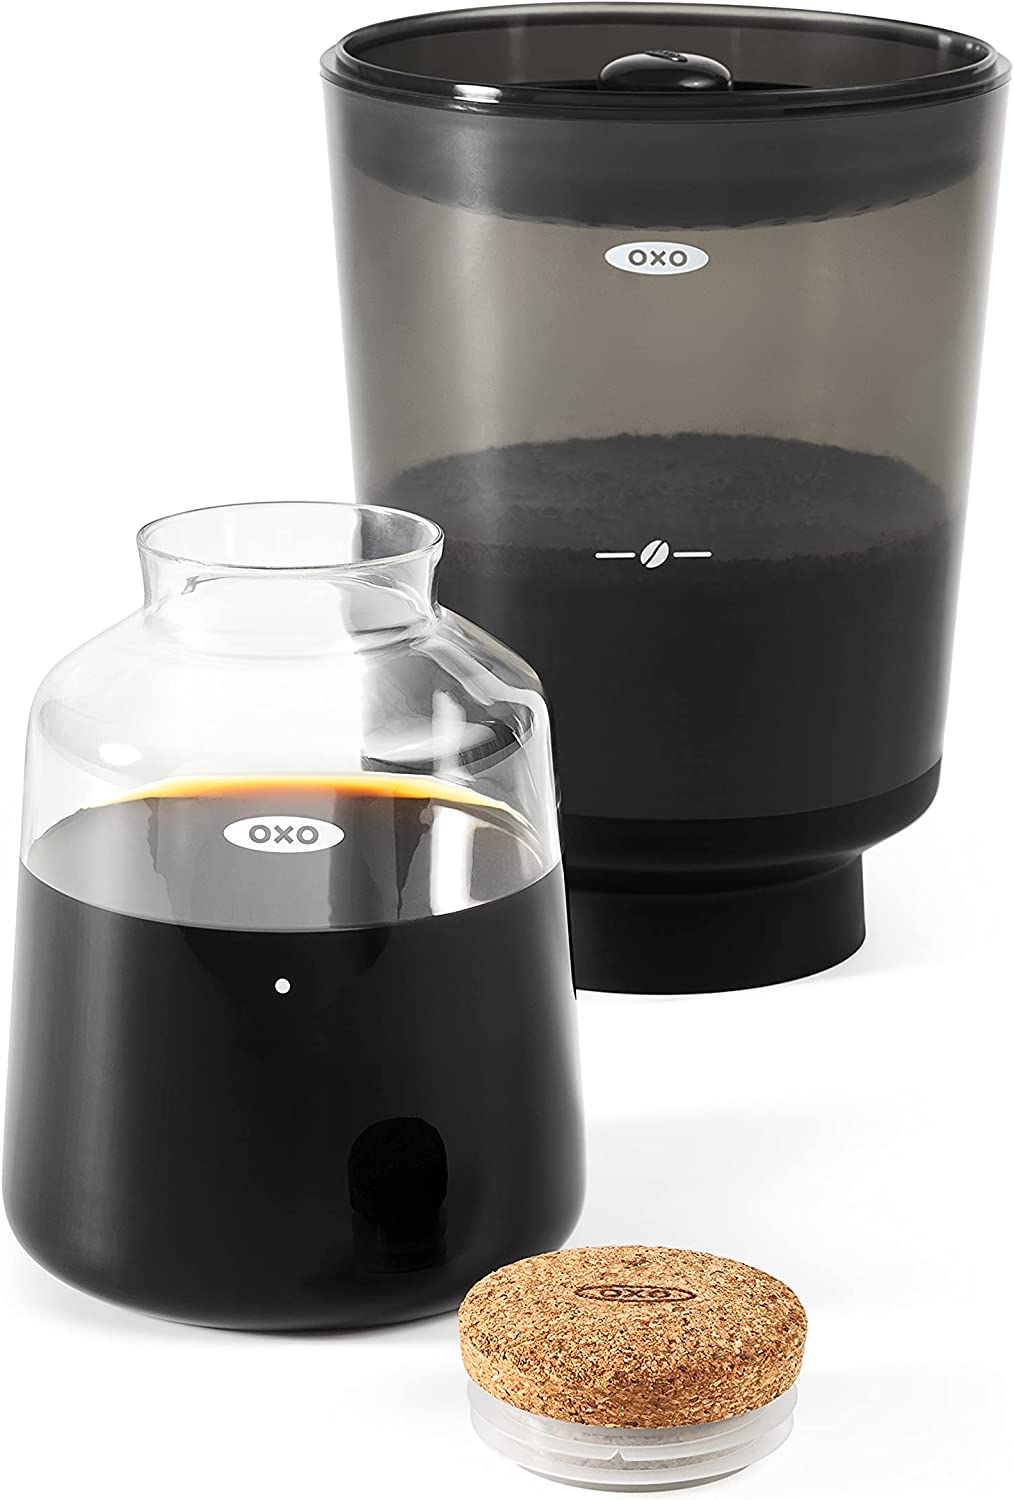 OXO Brew compact cold brew